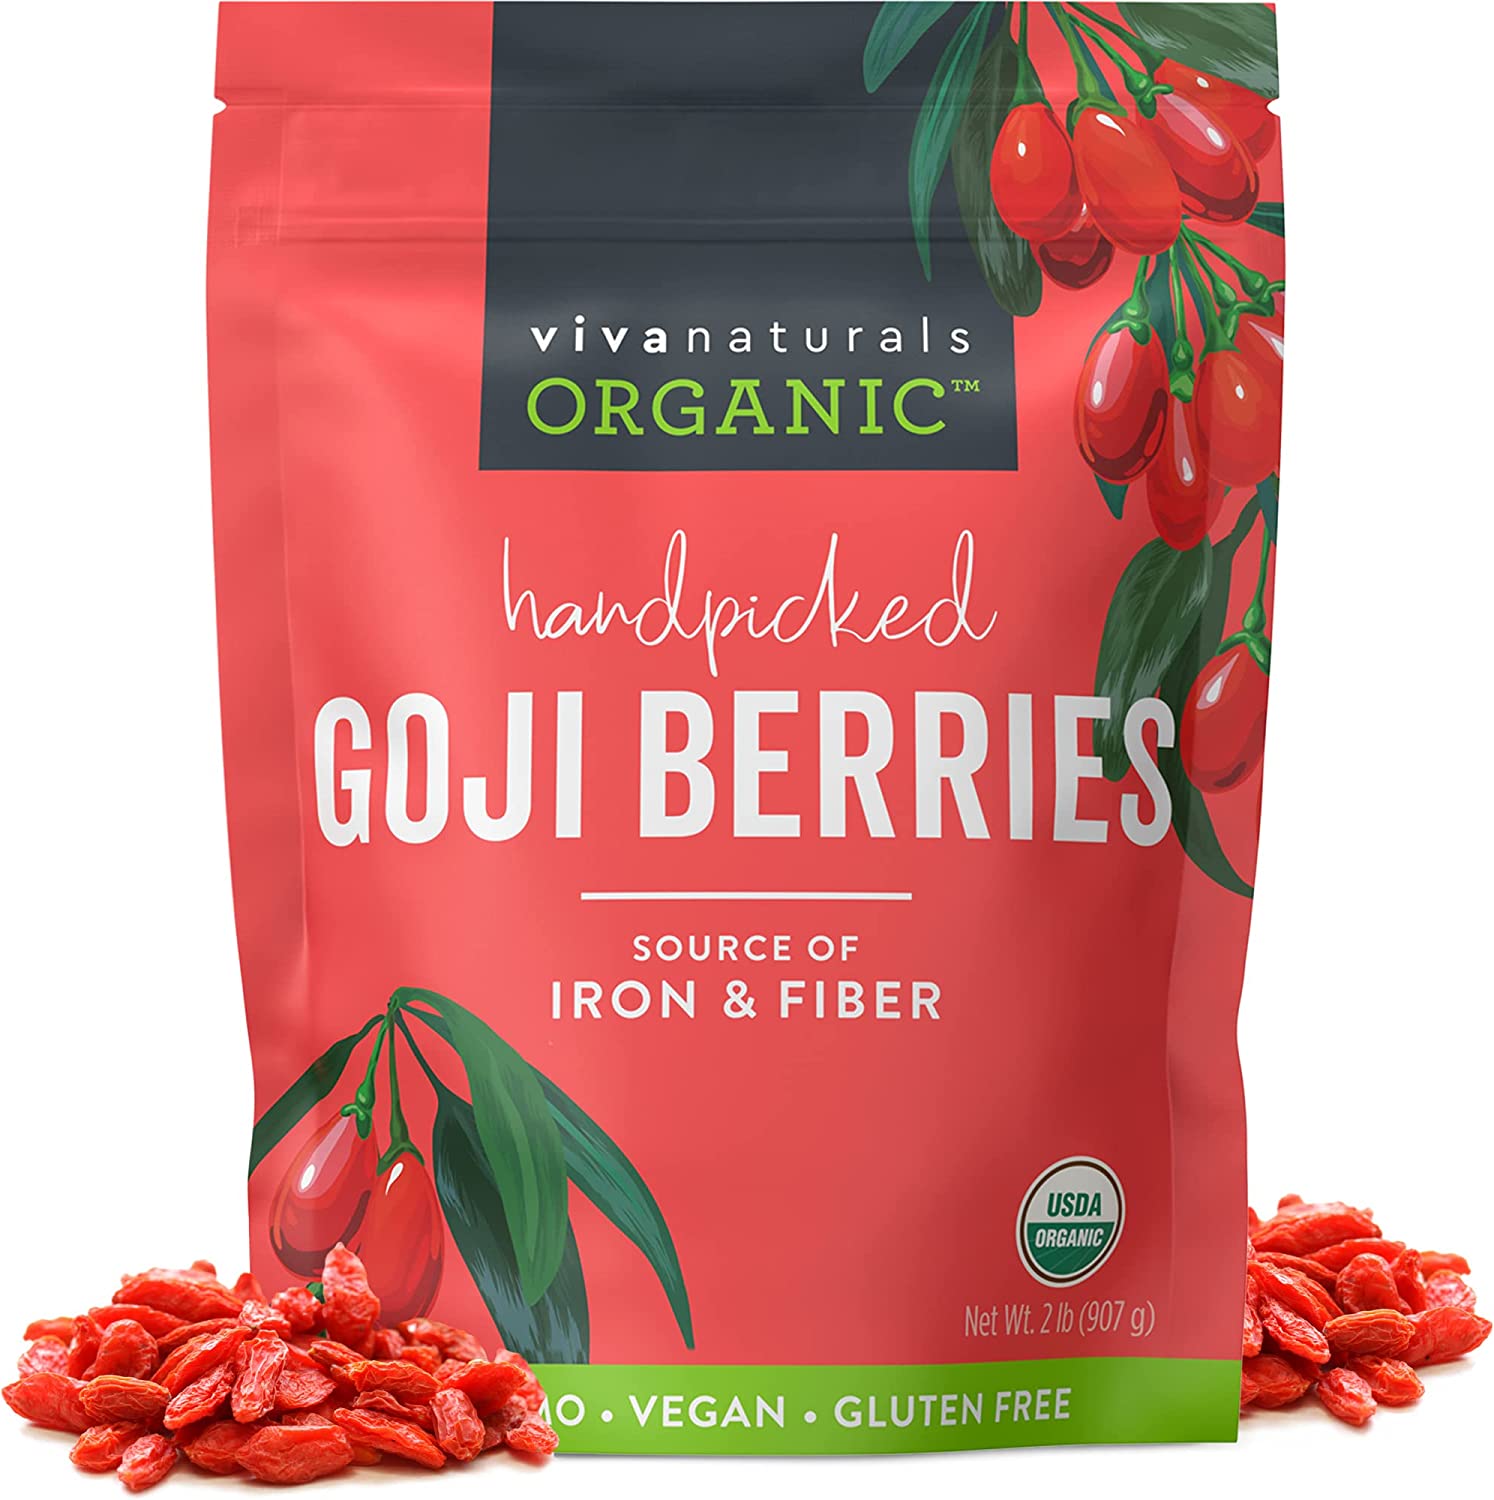 Organic Dried Goji Berries, 2 Lb- Non-GMO And Vegan Wolfberries, Perfect For Baking, Smoothies, Teas And Healthy Snacks For Adults, Goji Berries Organic (907 g)